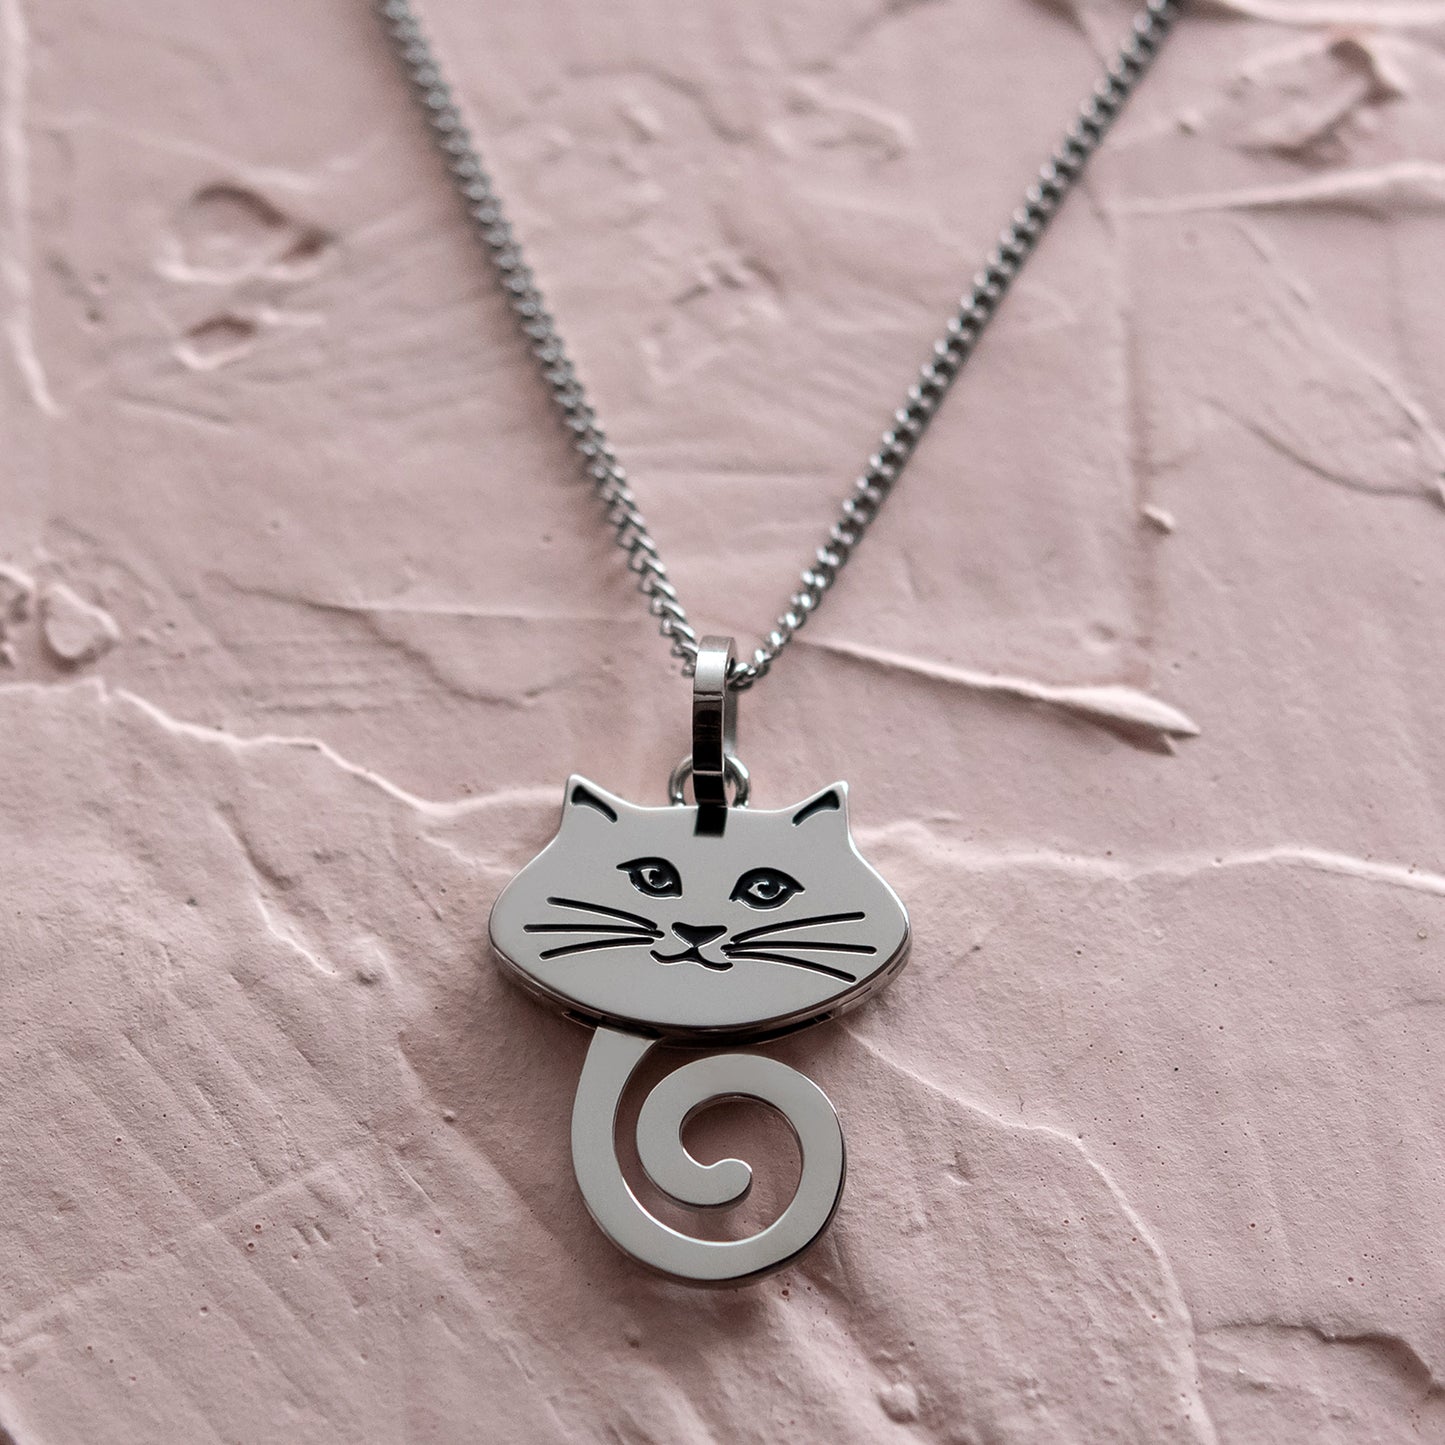 Stainless Steel Wagging Tail Cat Face Pendant Necklace - Unique Cat Lover Gift Jewelry